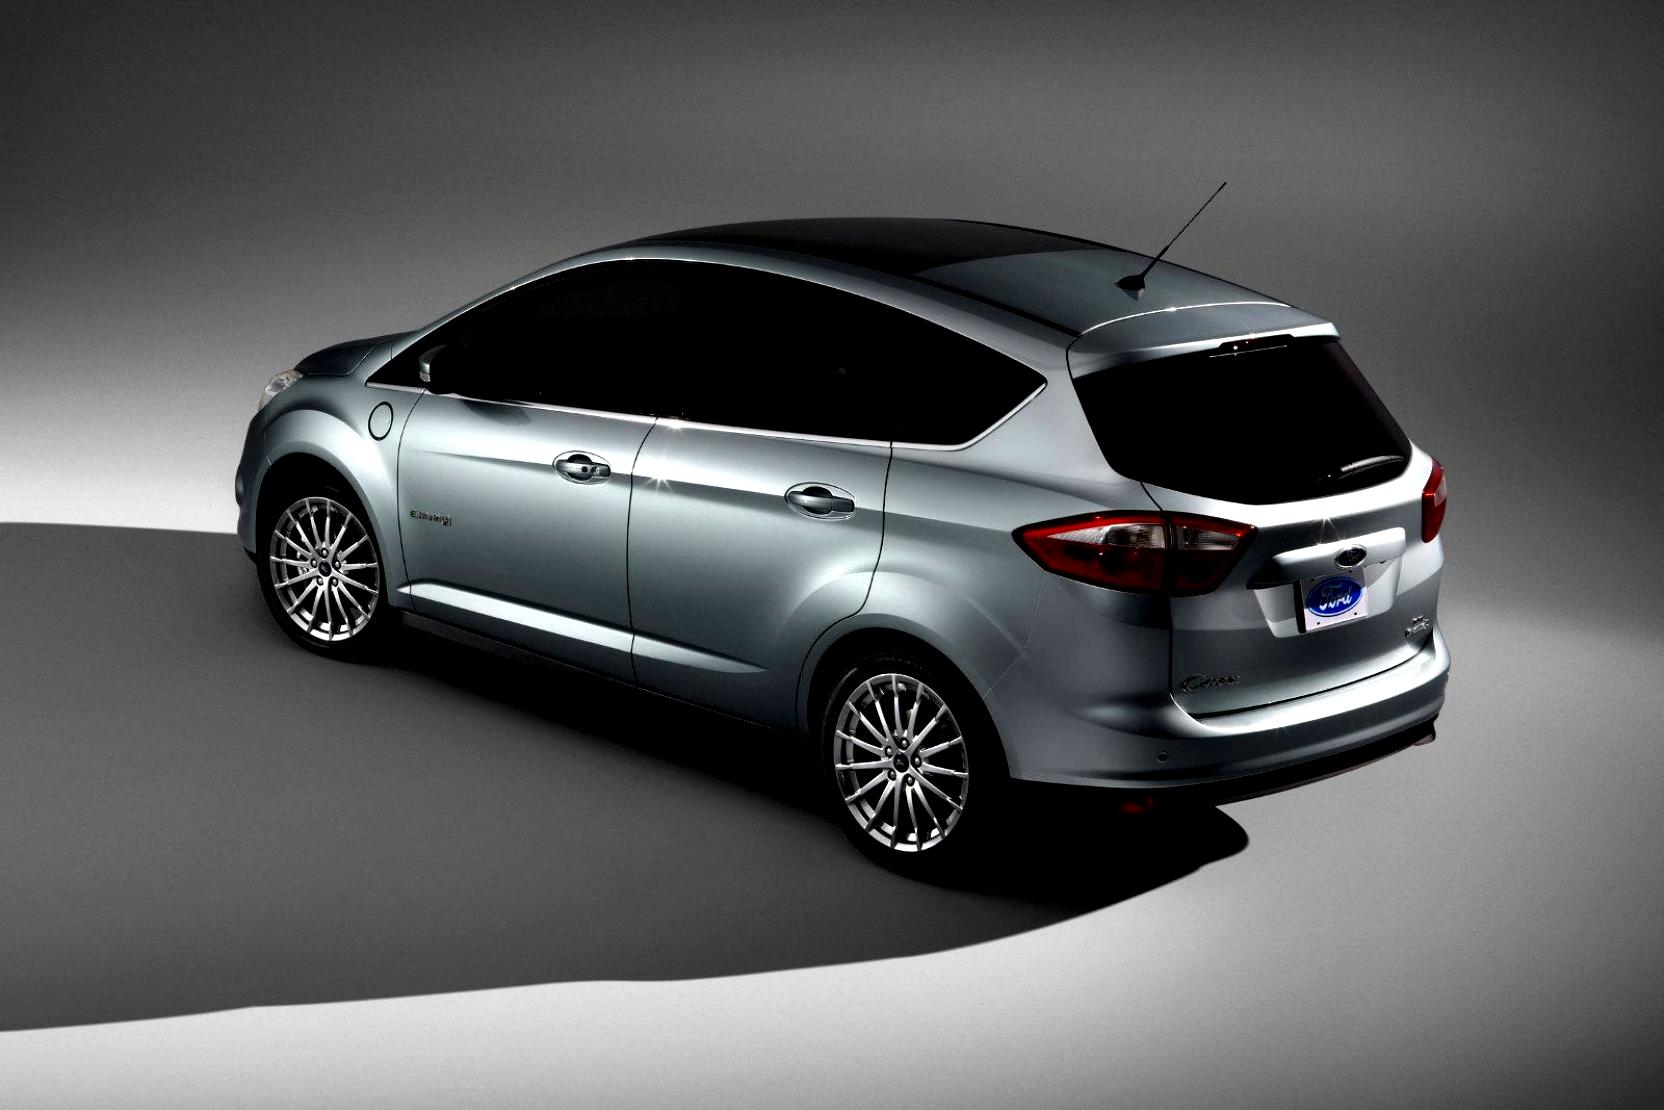 Ford C-Max 2014 #14